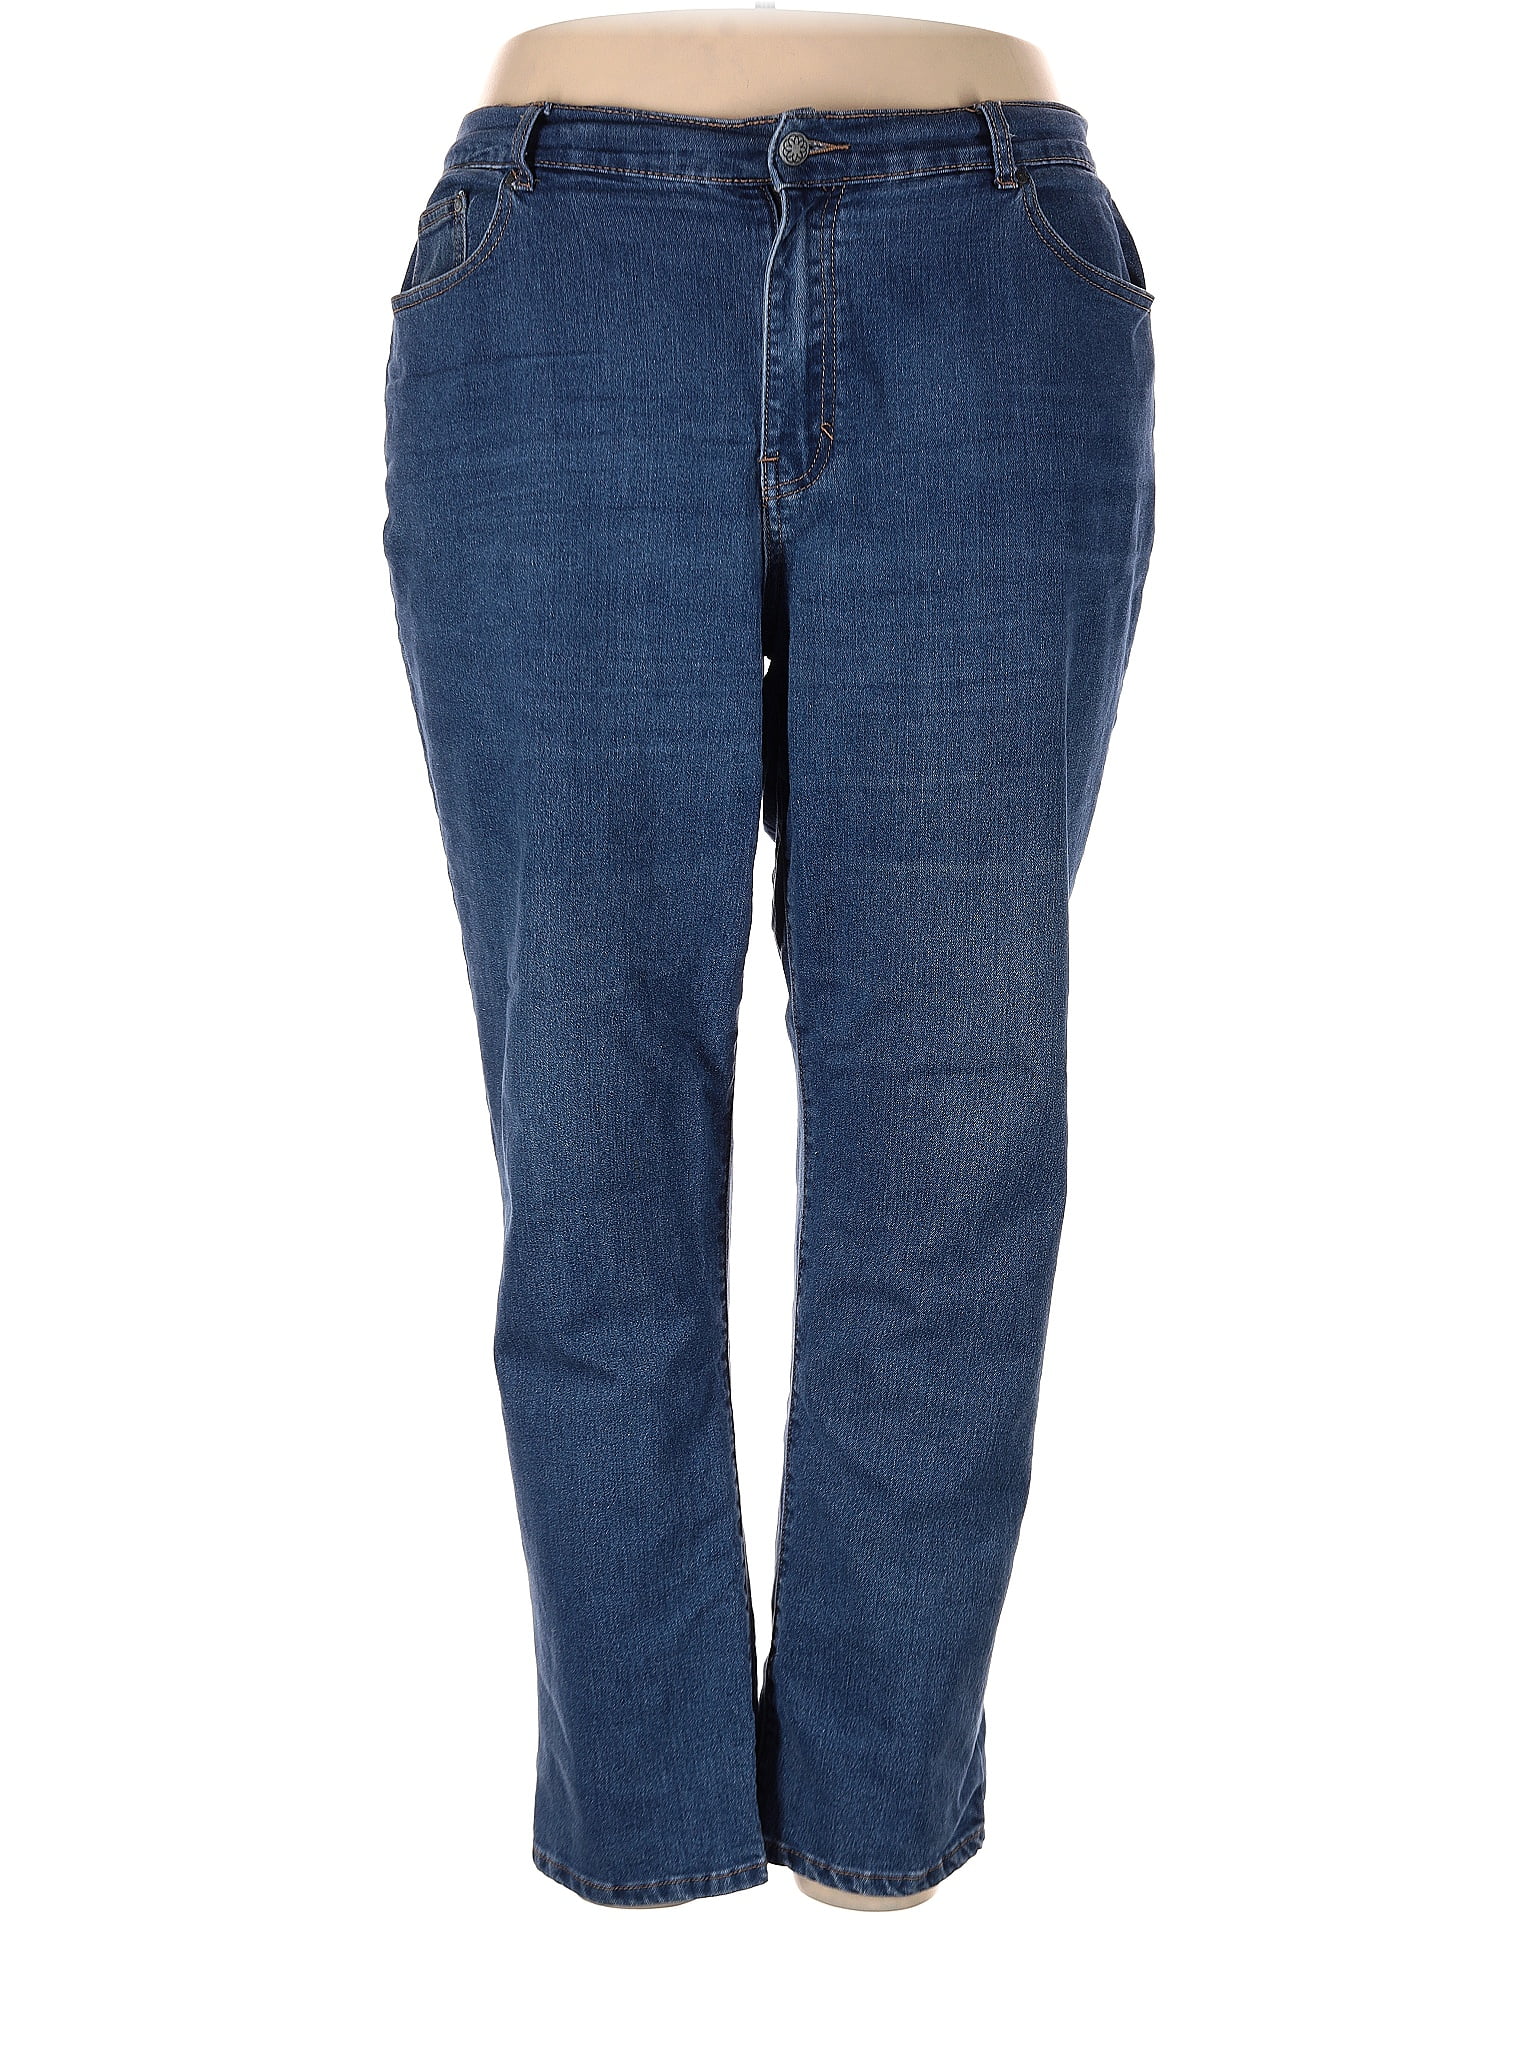 Catherines Solid Blue Jeans Size 18 (Plus) - 73% off | ThredUp